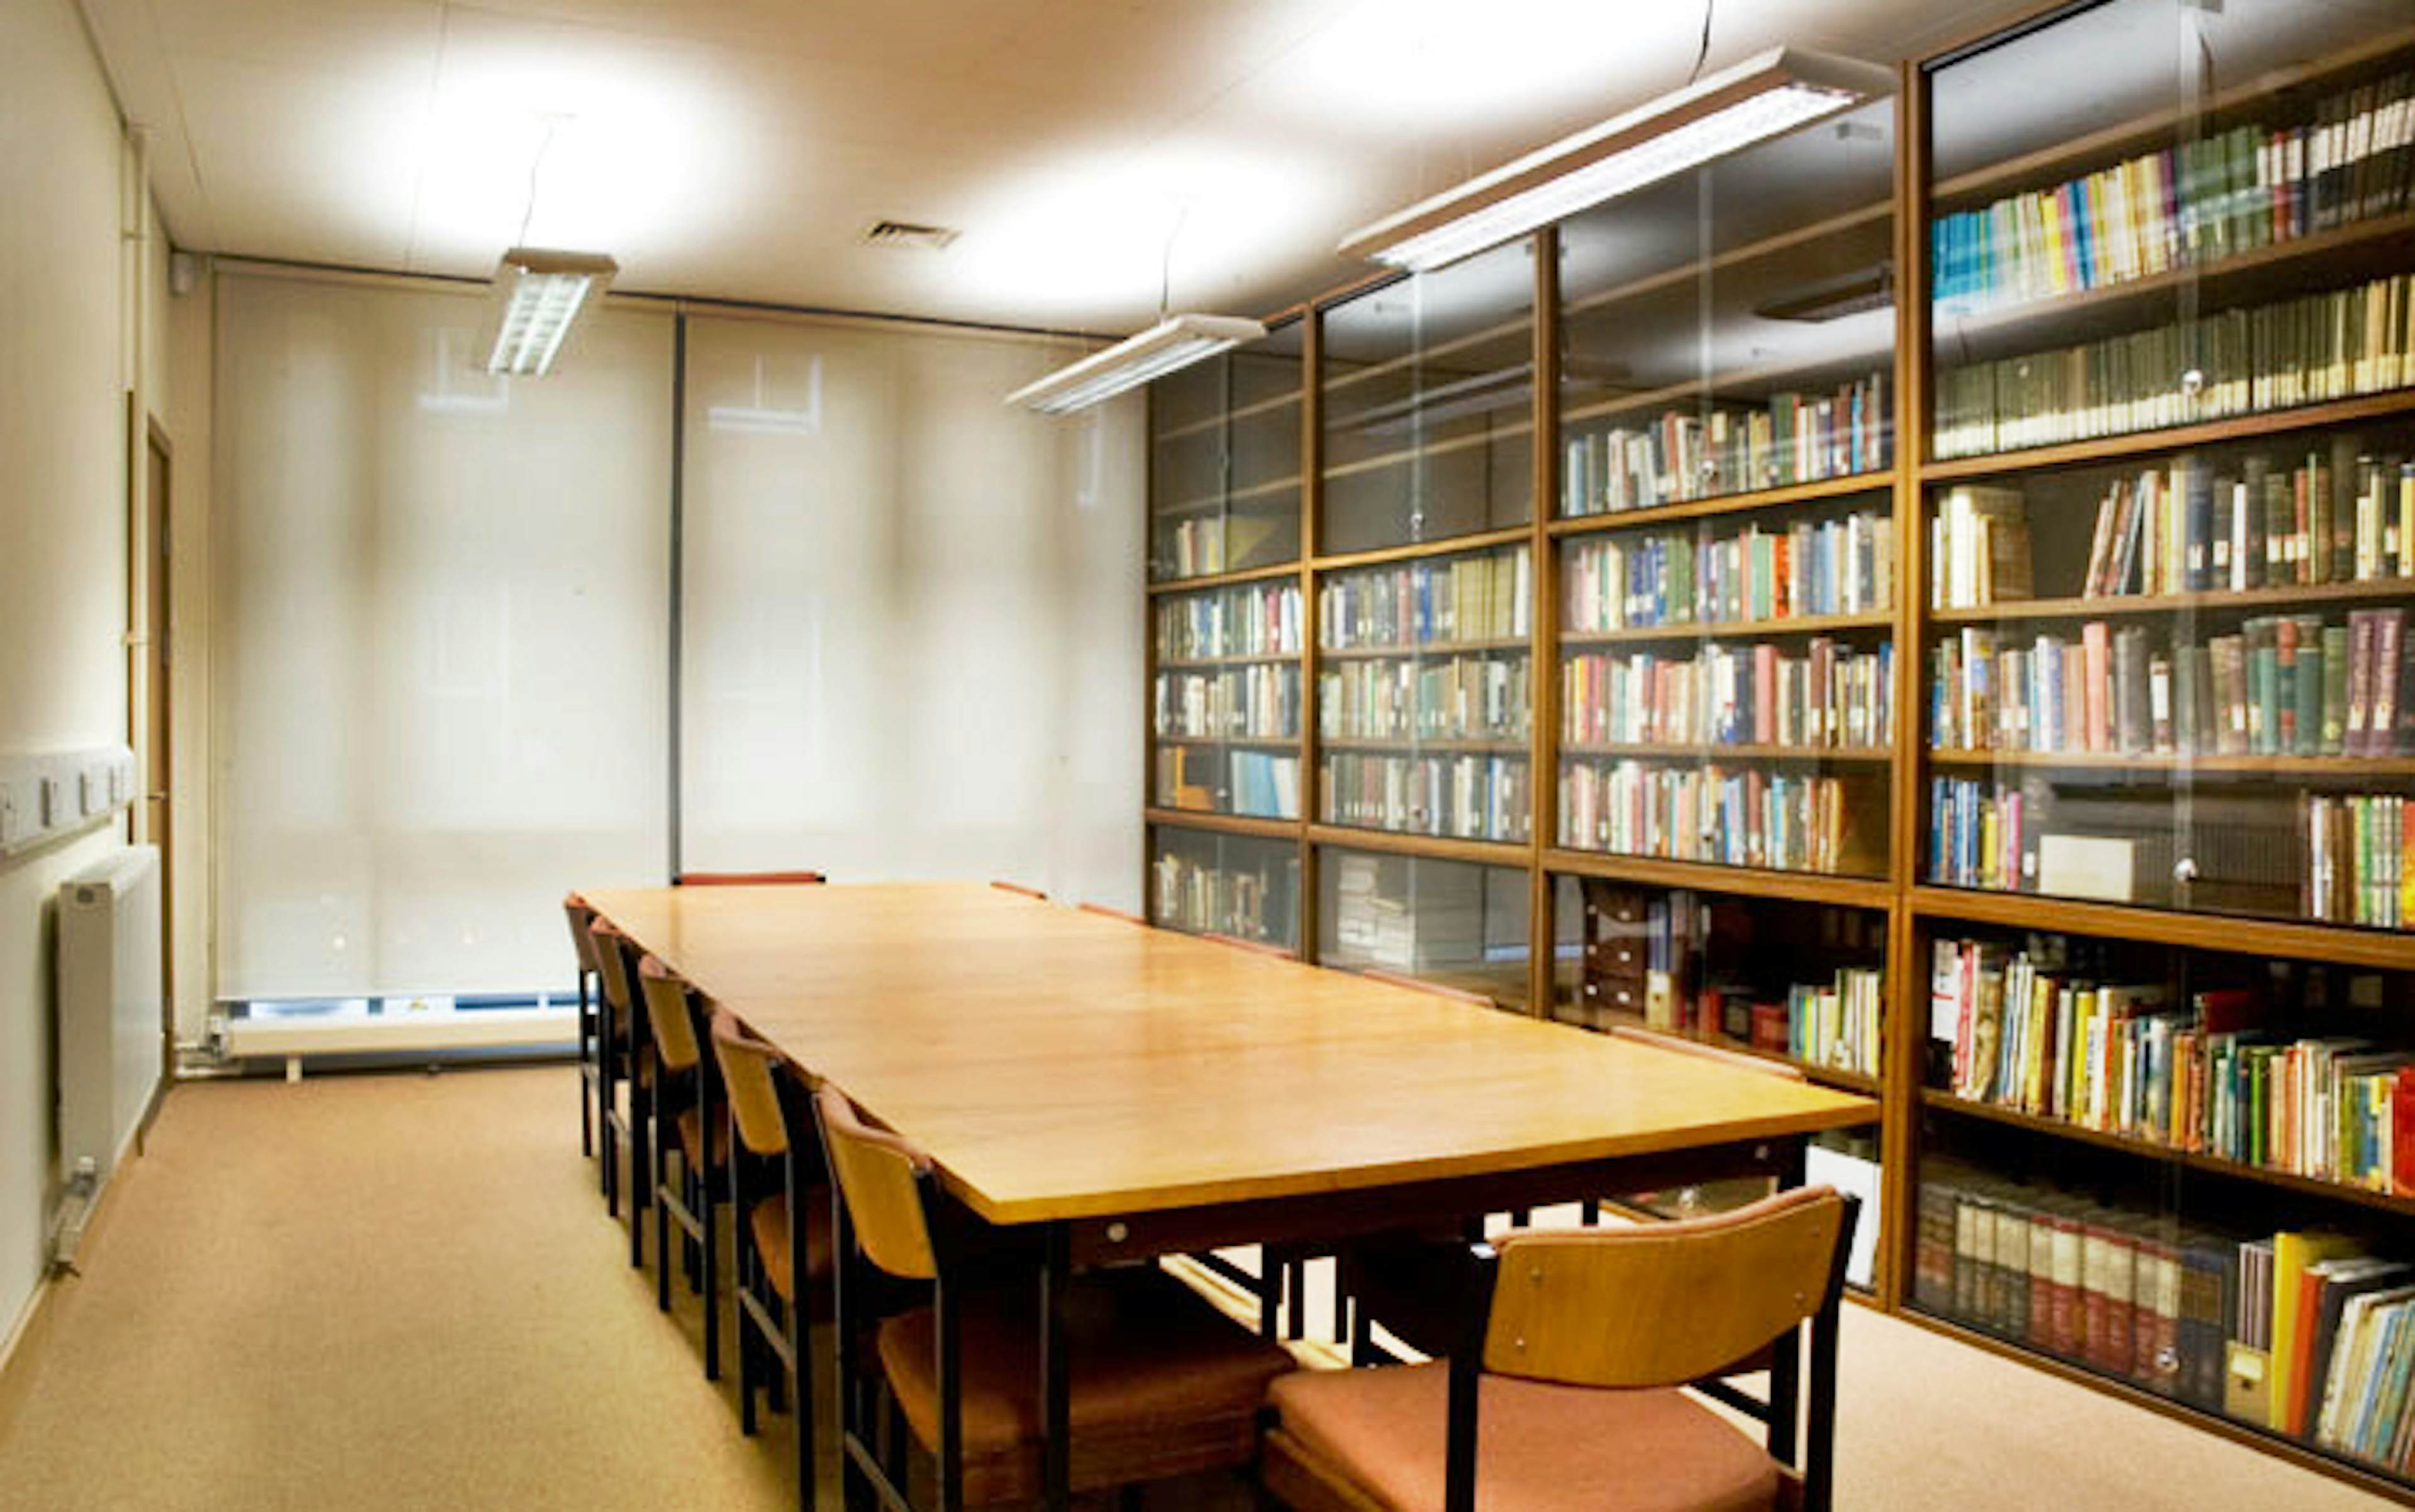 Liverpool Quaker Meeting House - Library image 1